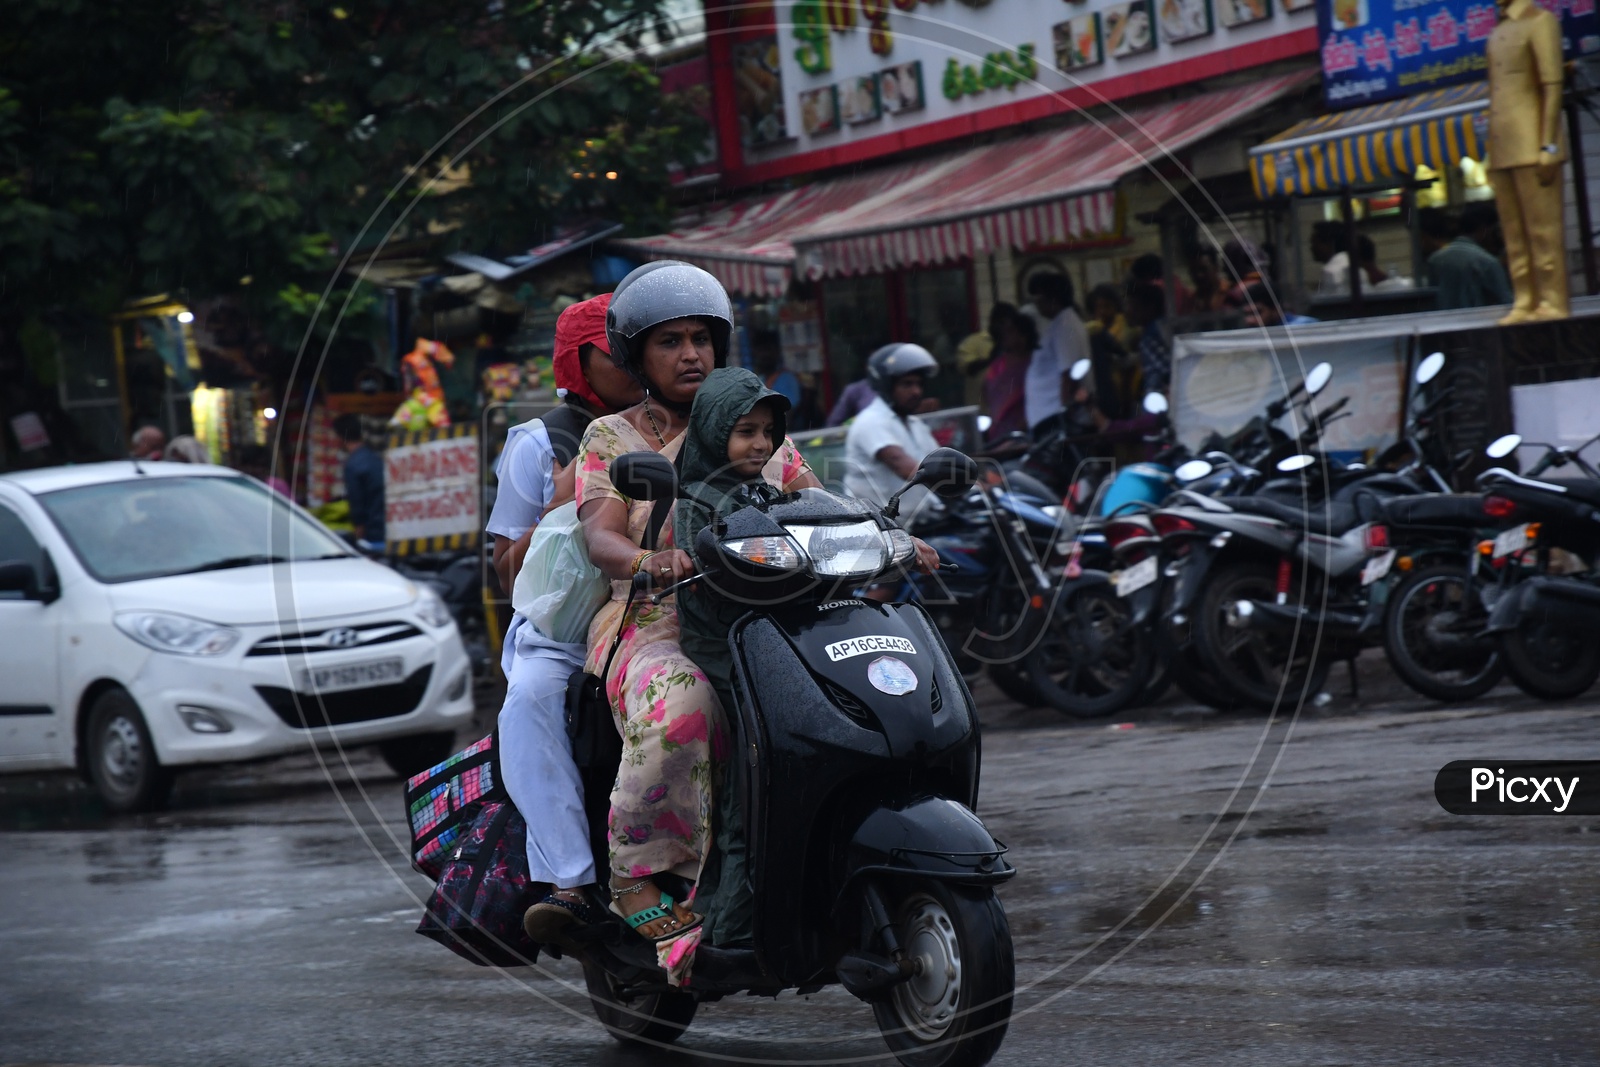 A Mother with her Children going on Scooty while raining